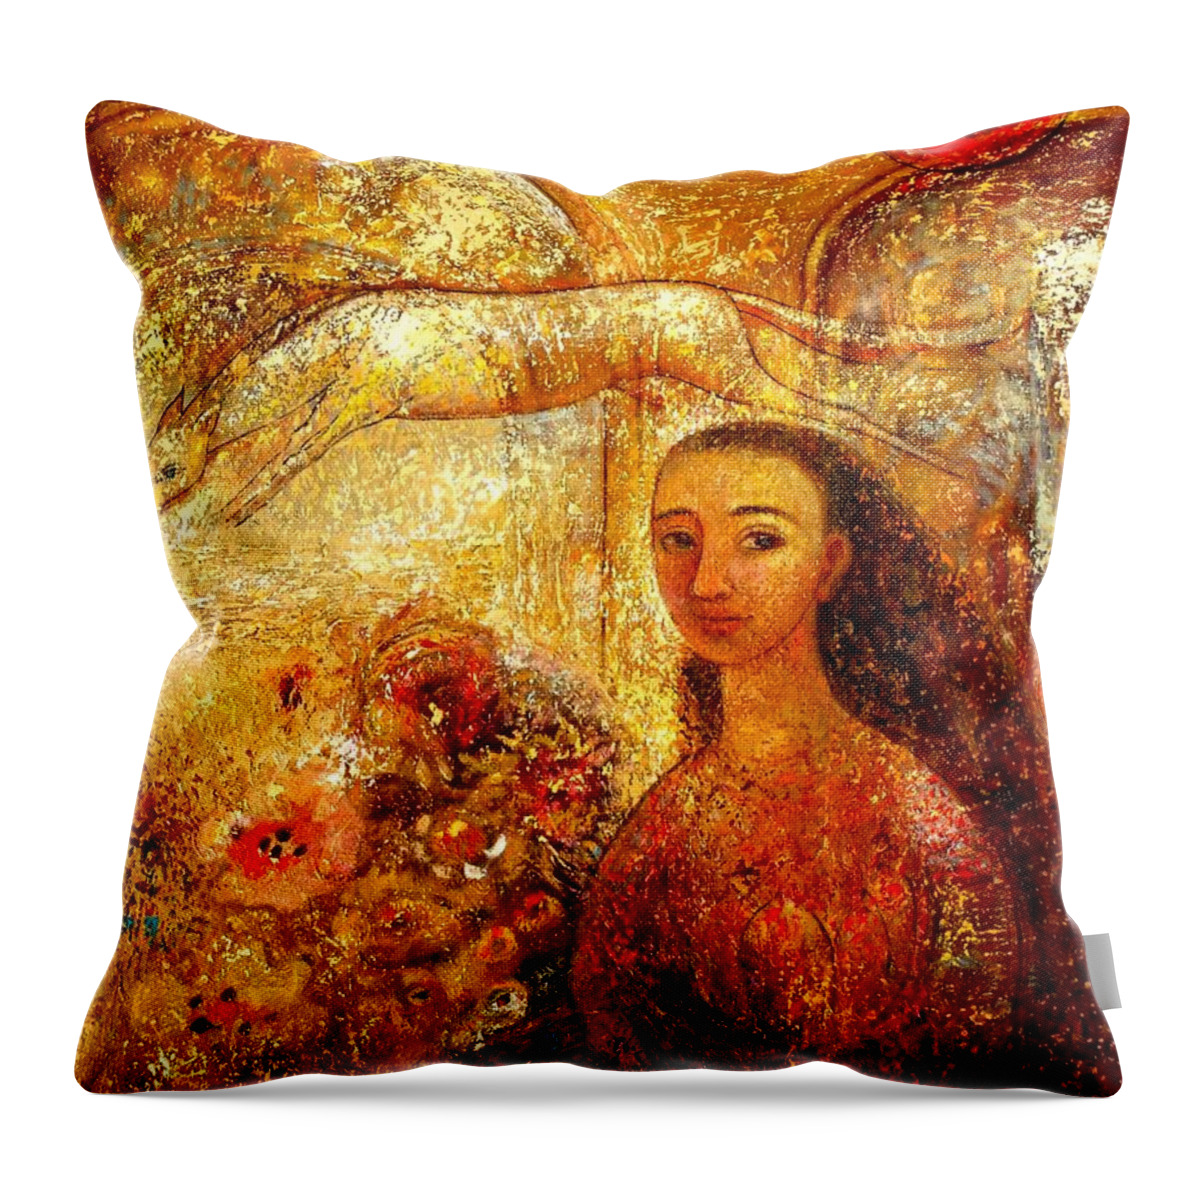 Portrait Throw Pillow featuring the painting Gateway by Shijun Munns